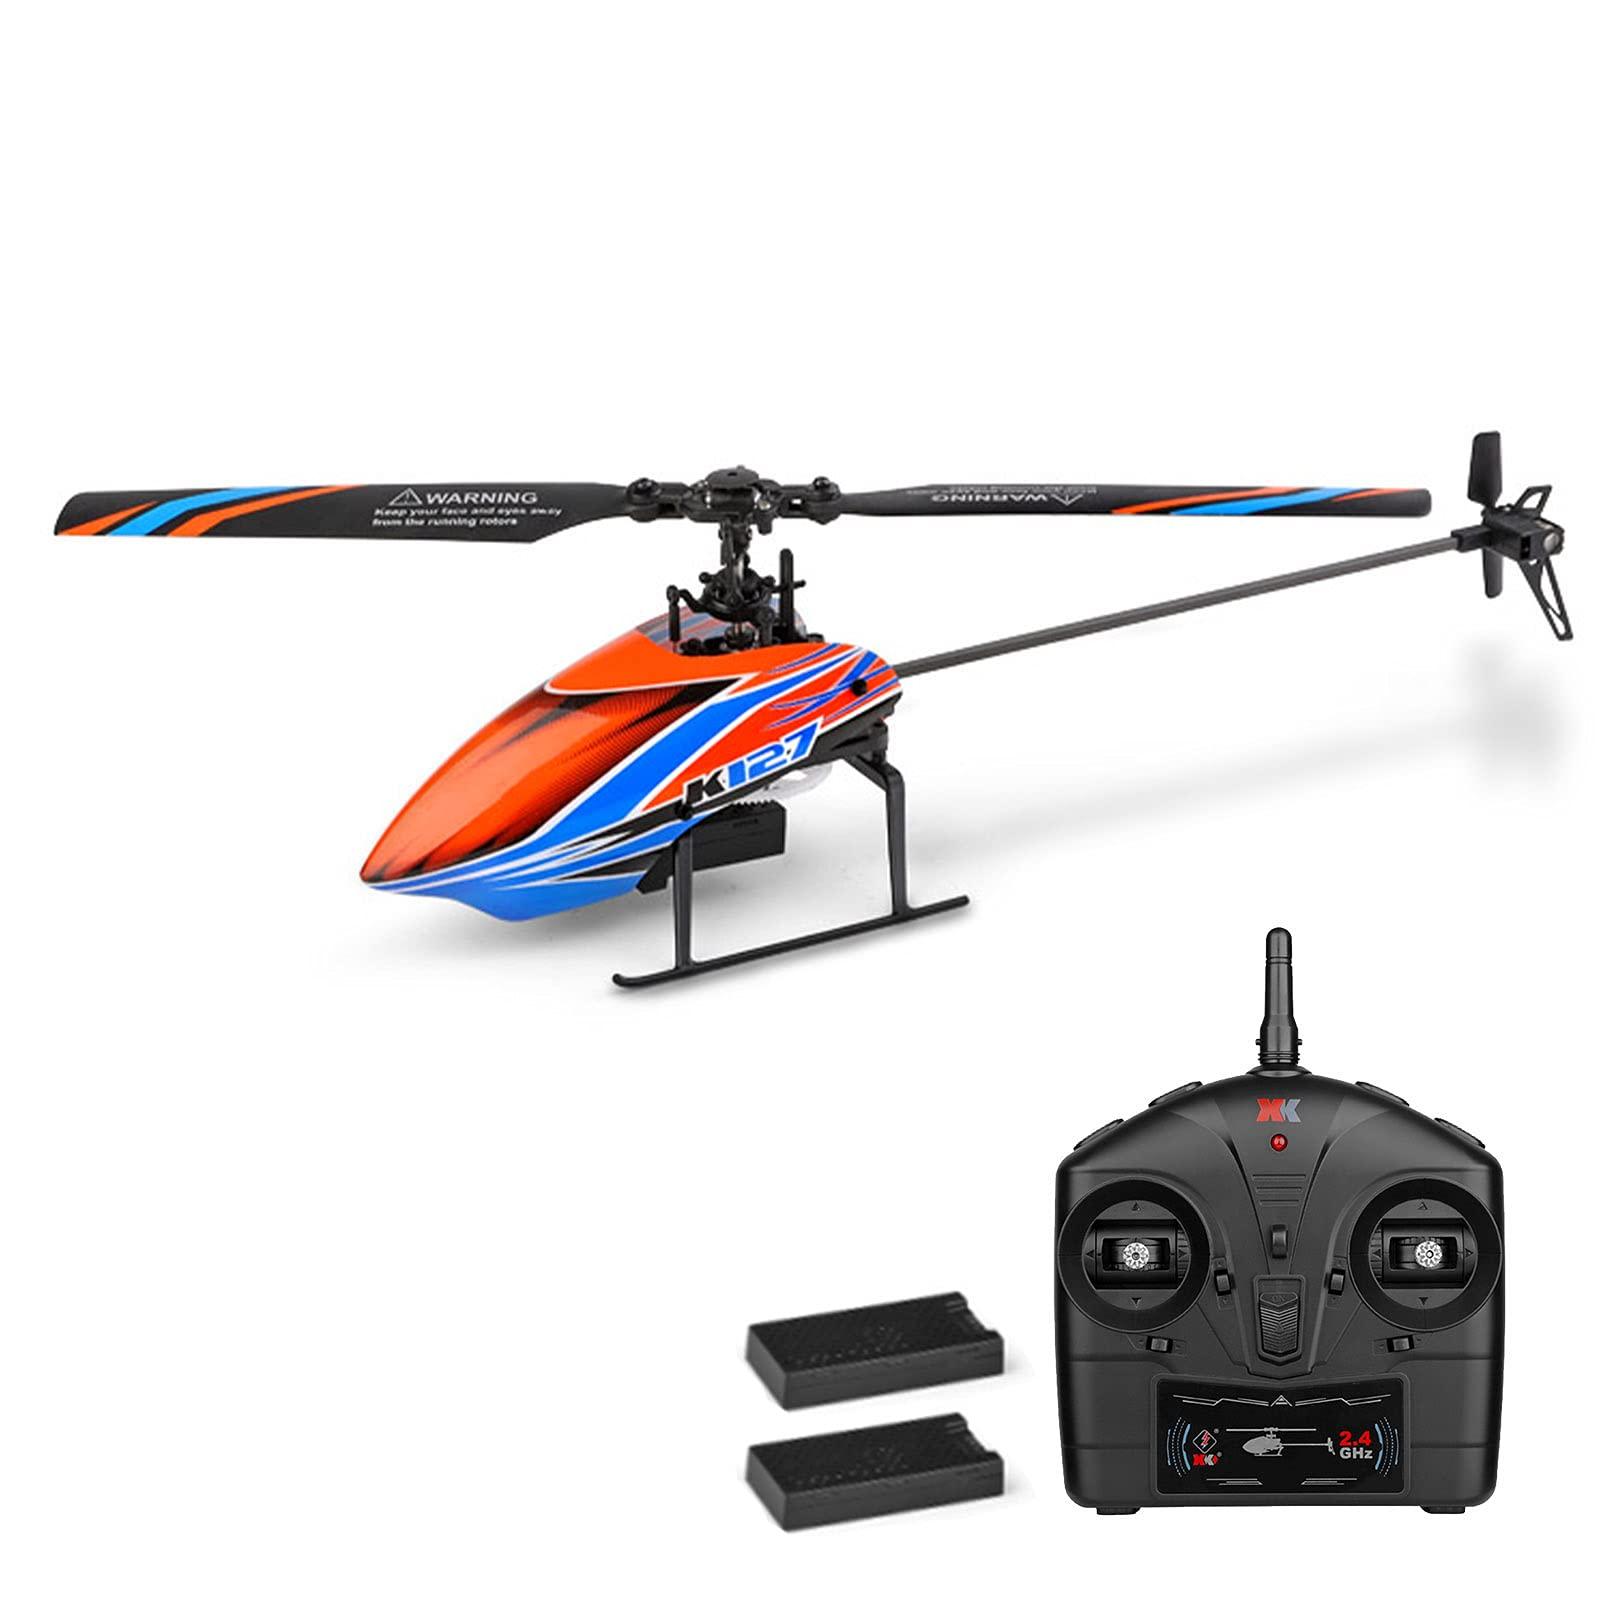 Powerful Remote Control Helicopter: Exciting developments in remote control helicopter technology